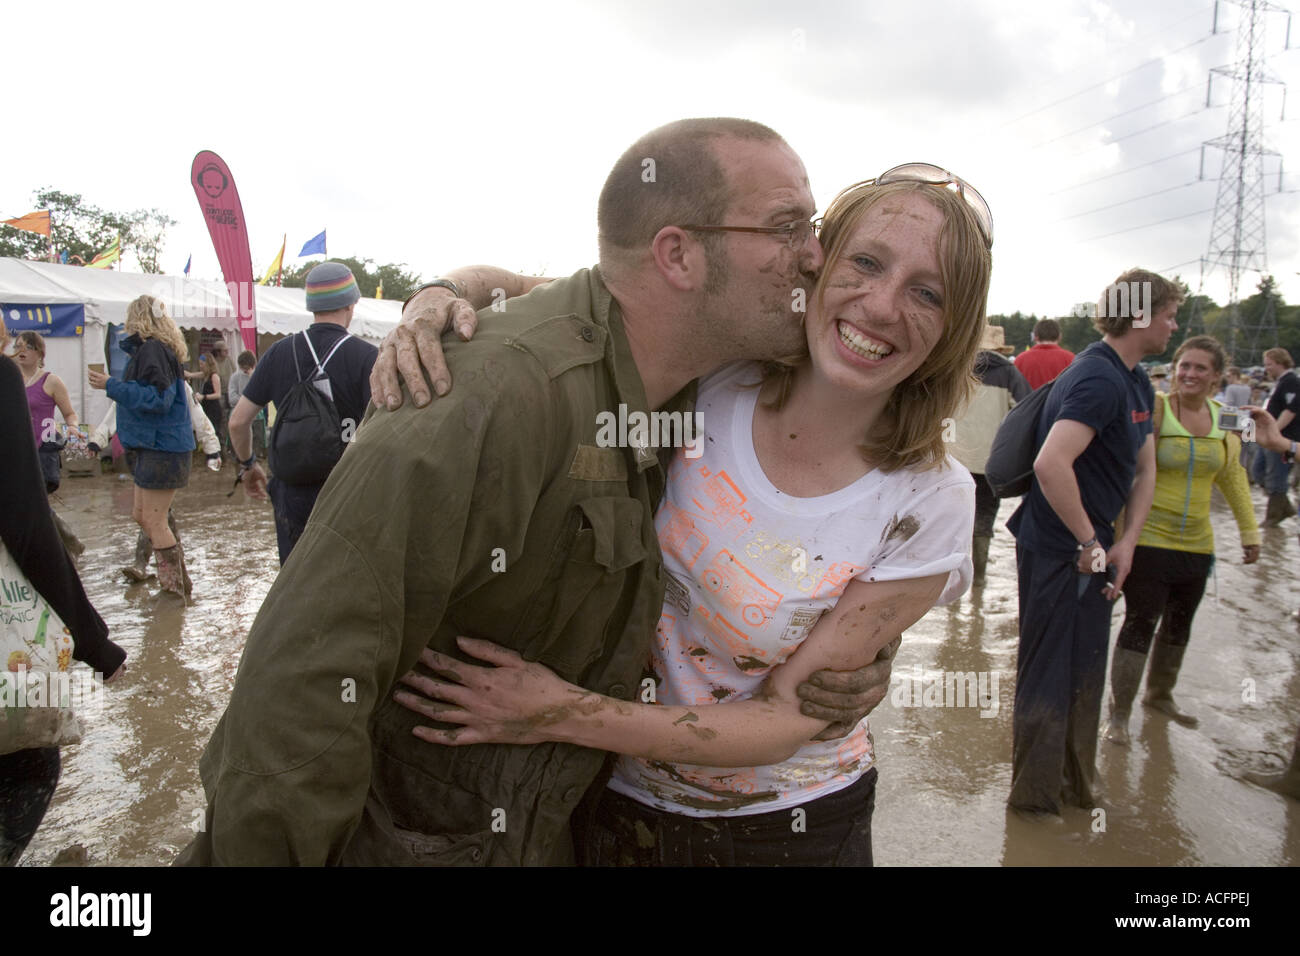 A man with his face covered in mud kissing a smiling woman at the Glastonbury Festival 2007. Stock Photo